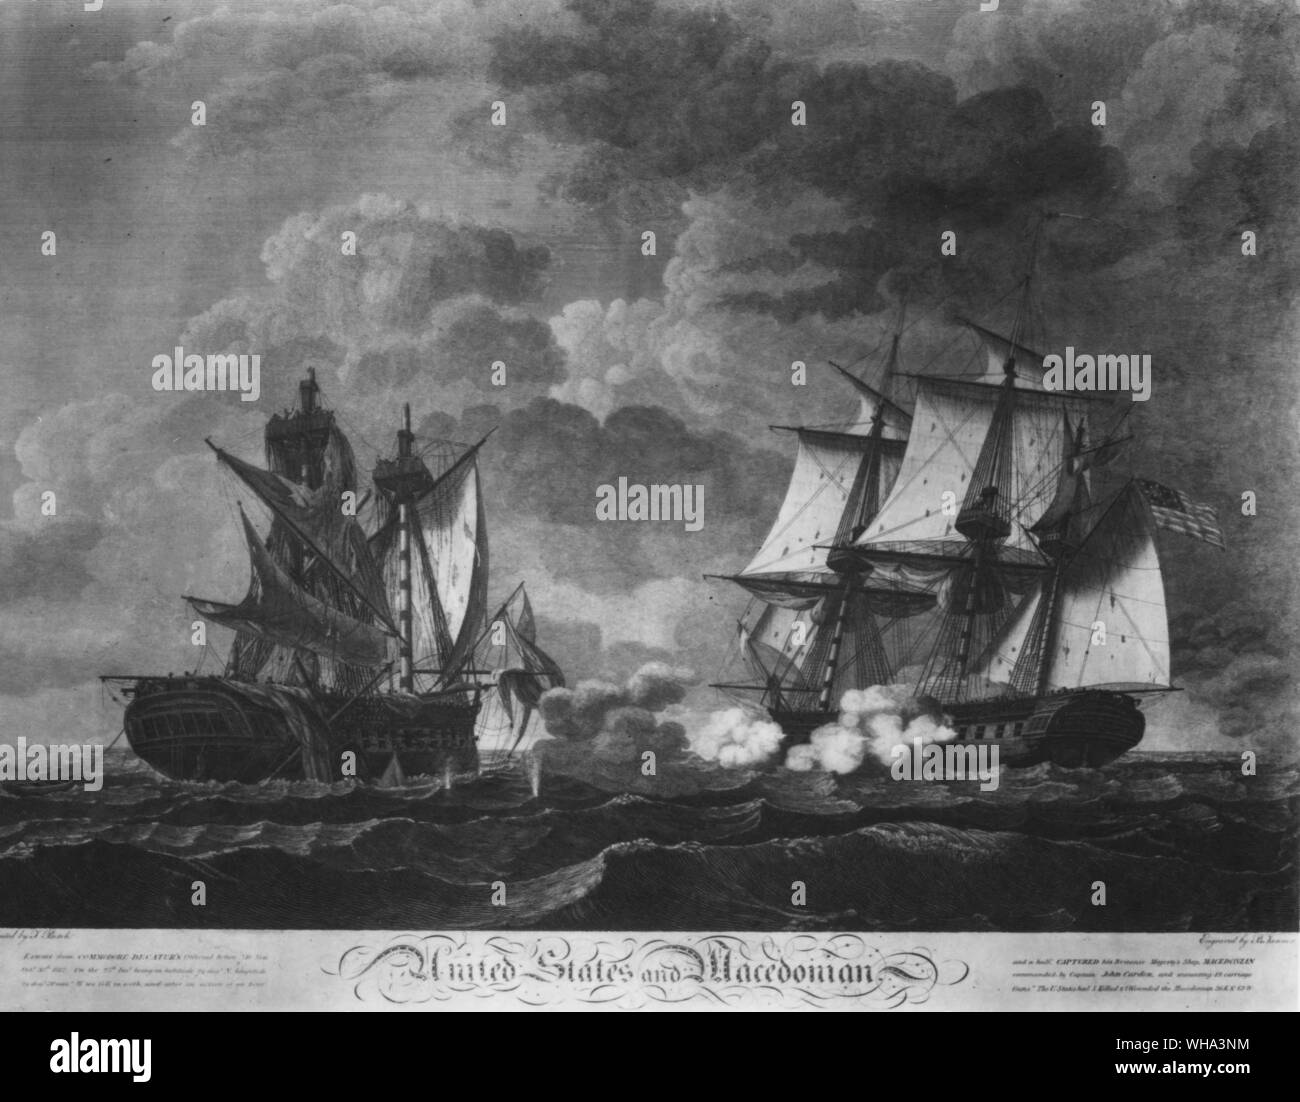 Ships: The United States and Macedonia. 1812. Stock Photo